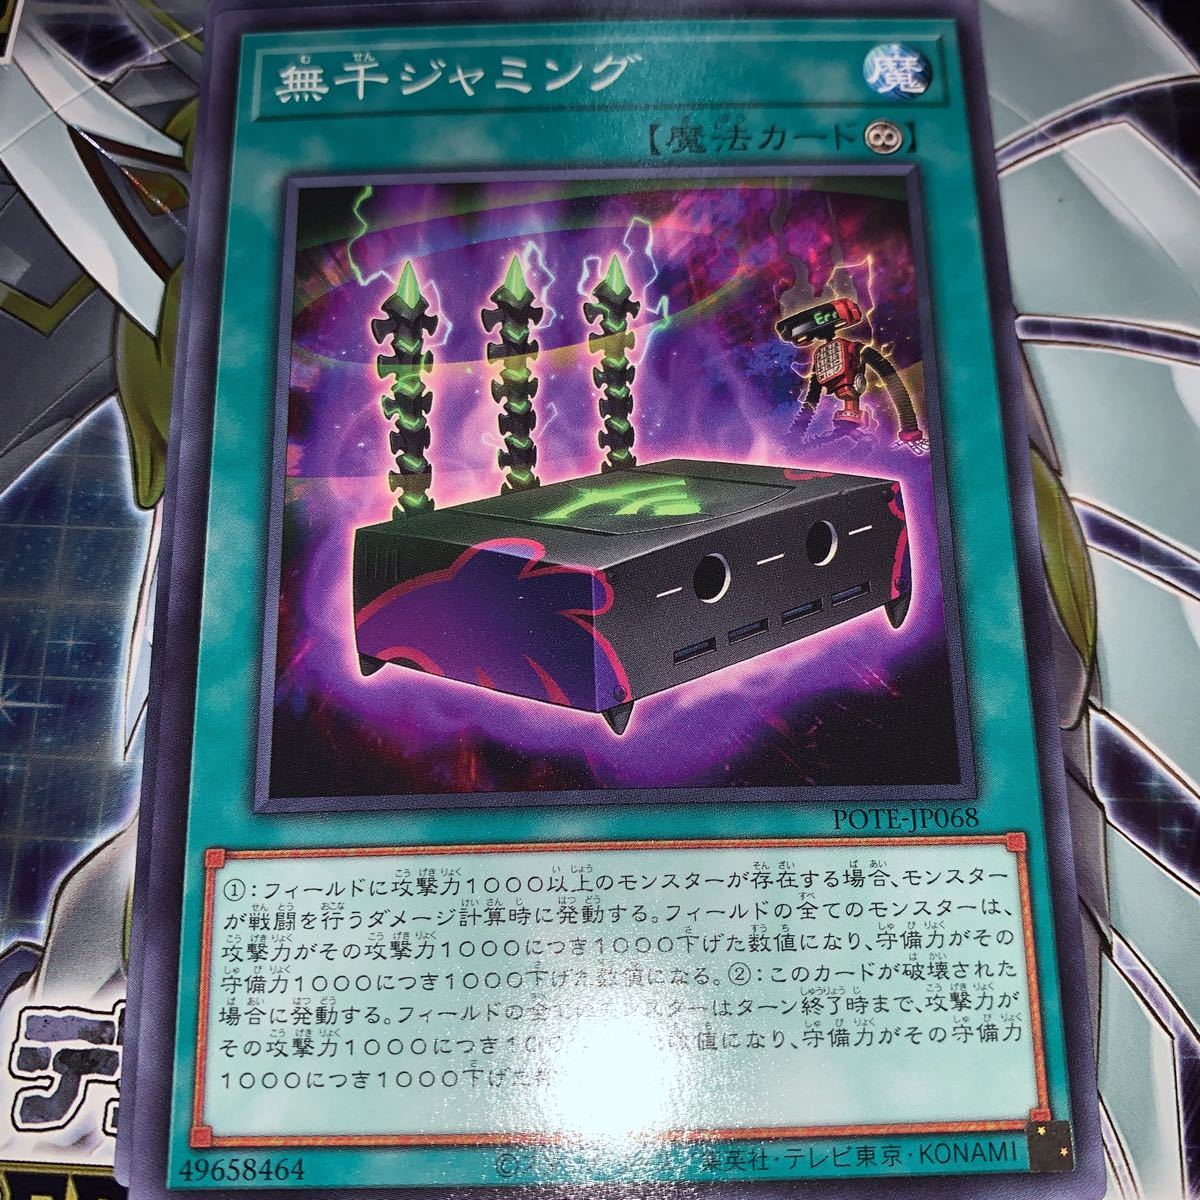  Yugioh normal POTE-JP068 less thousand jamingPOWER OF THE ELEMENTS